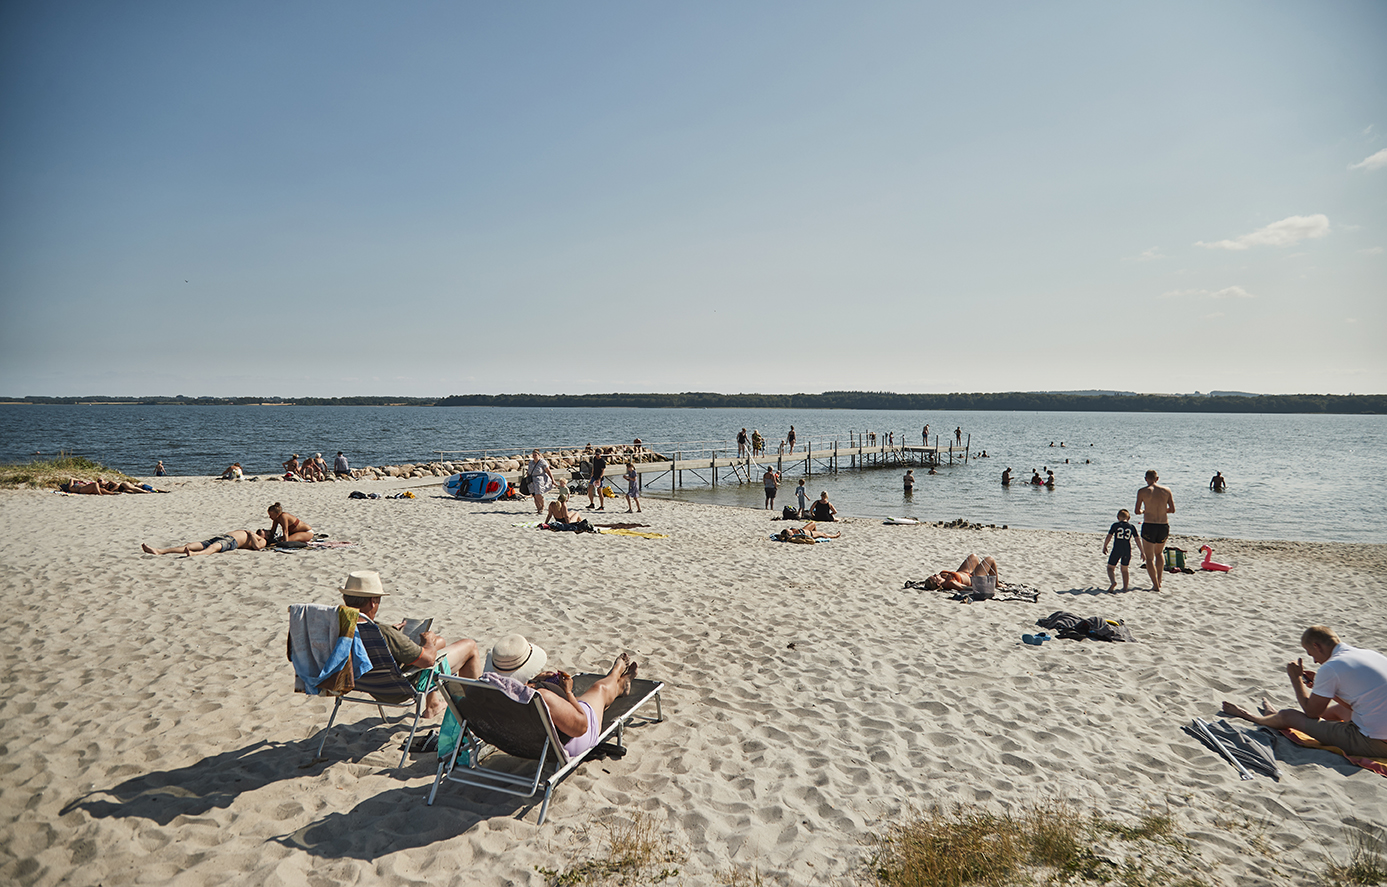 A real sandy beach close to Horsens for children and adults